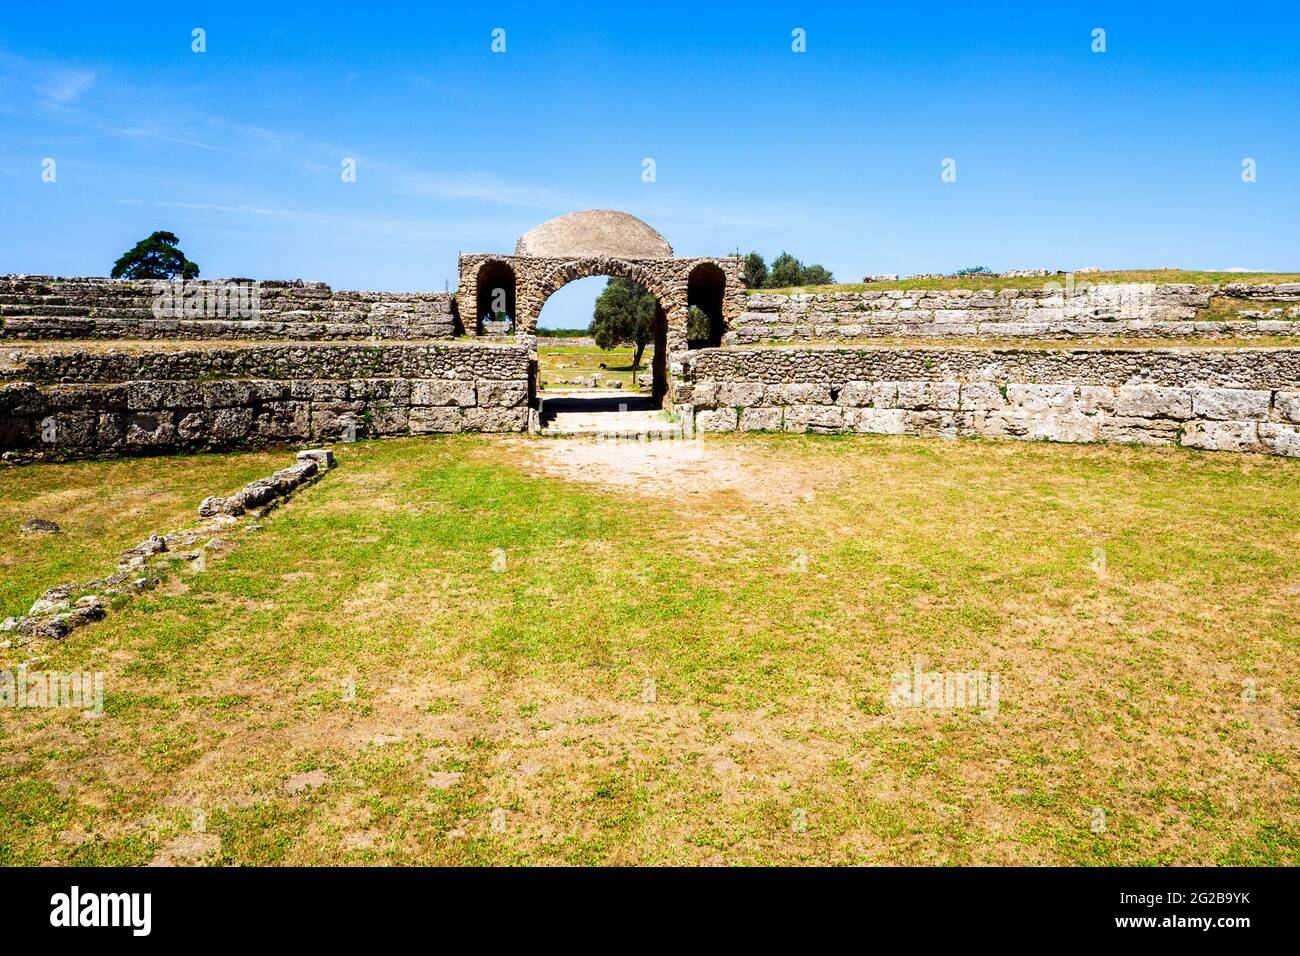 Entrance of the Amphitheatre - Archaeological Area of Paestum - Salerno, Italy Stock Photo